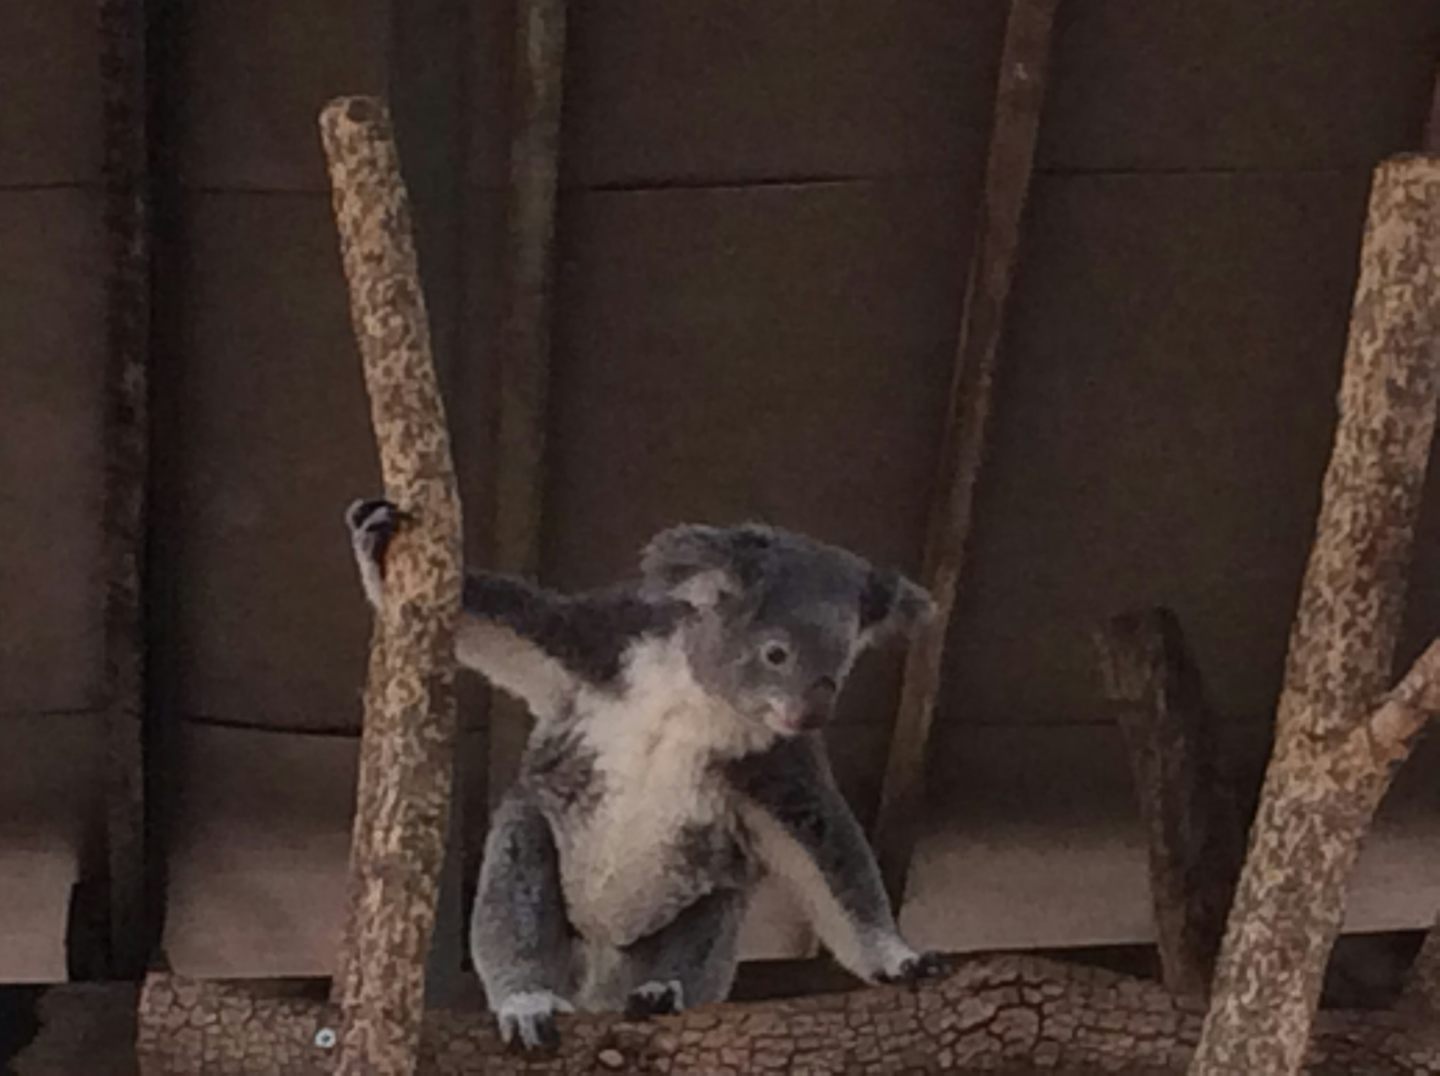 Seeing and holding koalas